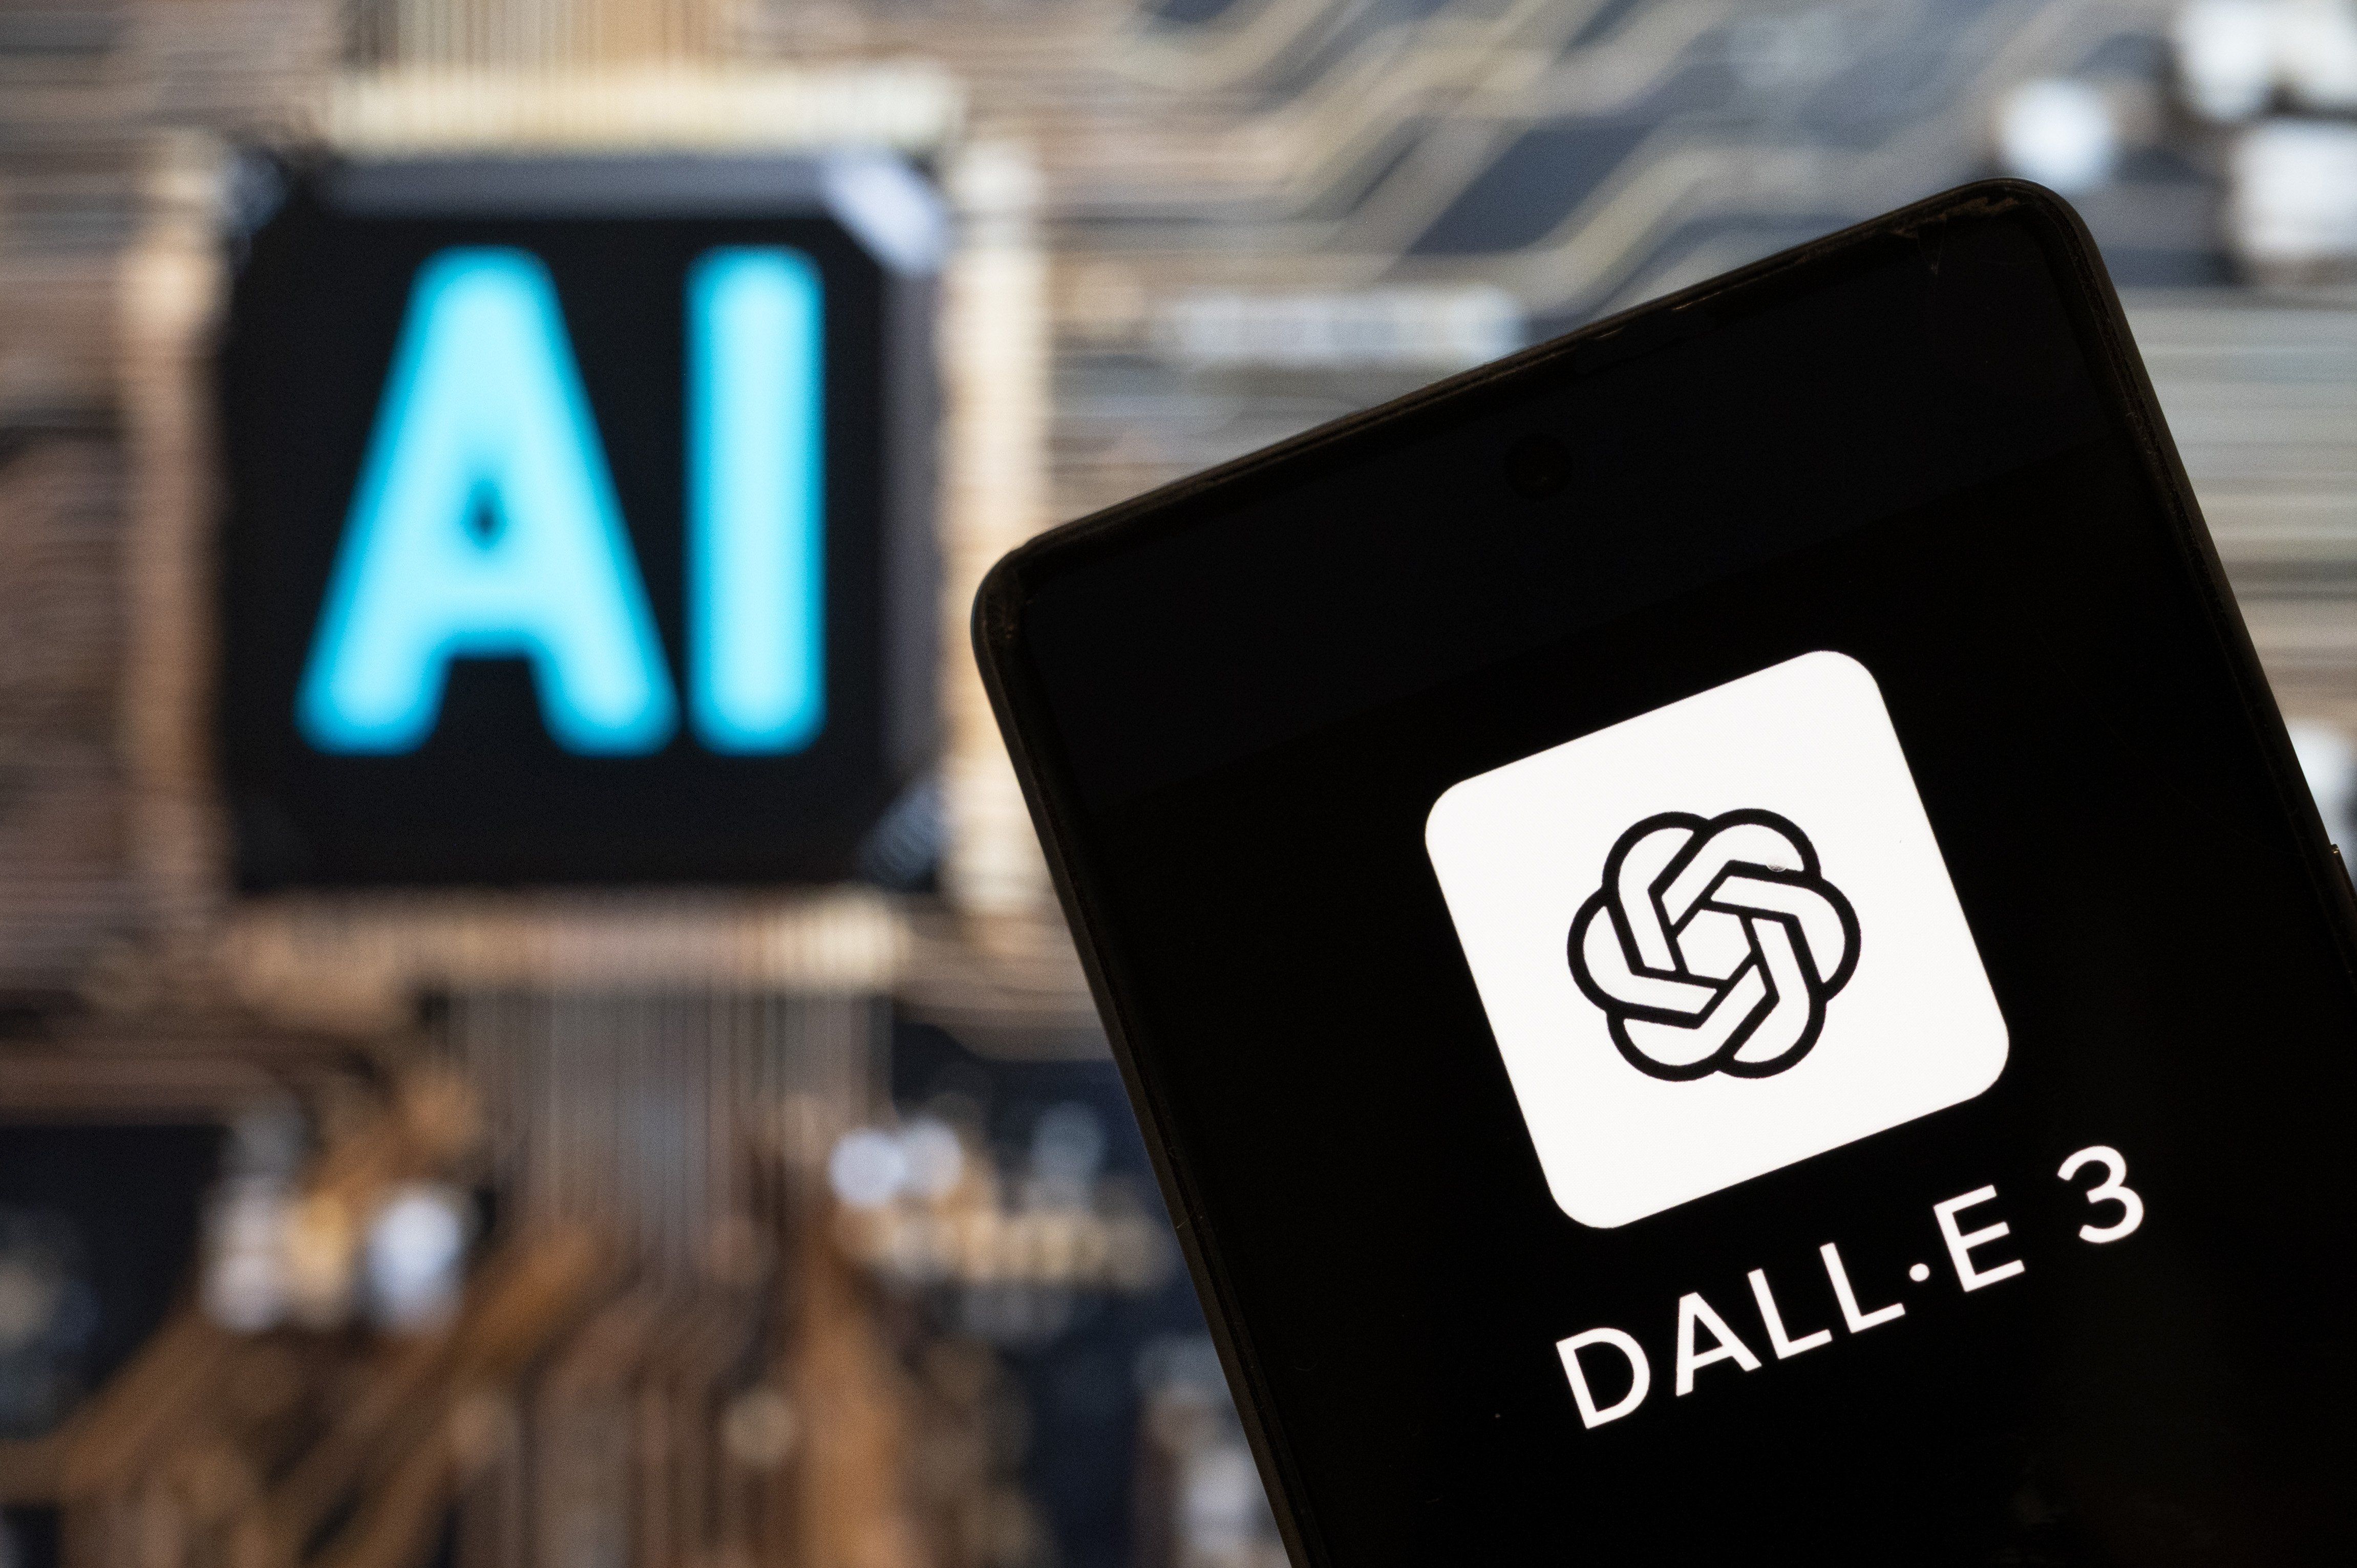 Photo illustration showing the DALL-E logo on a smartphone with an Artificial intelligence chip and symbol in the background.​